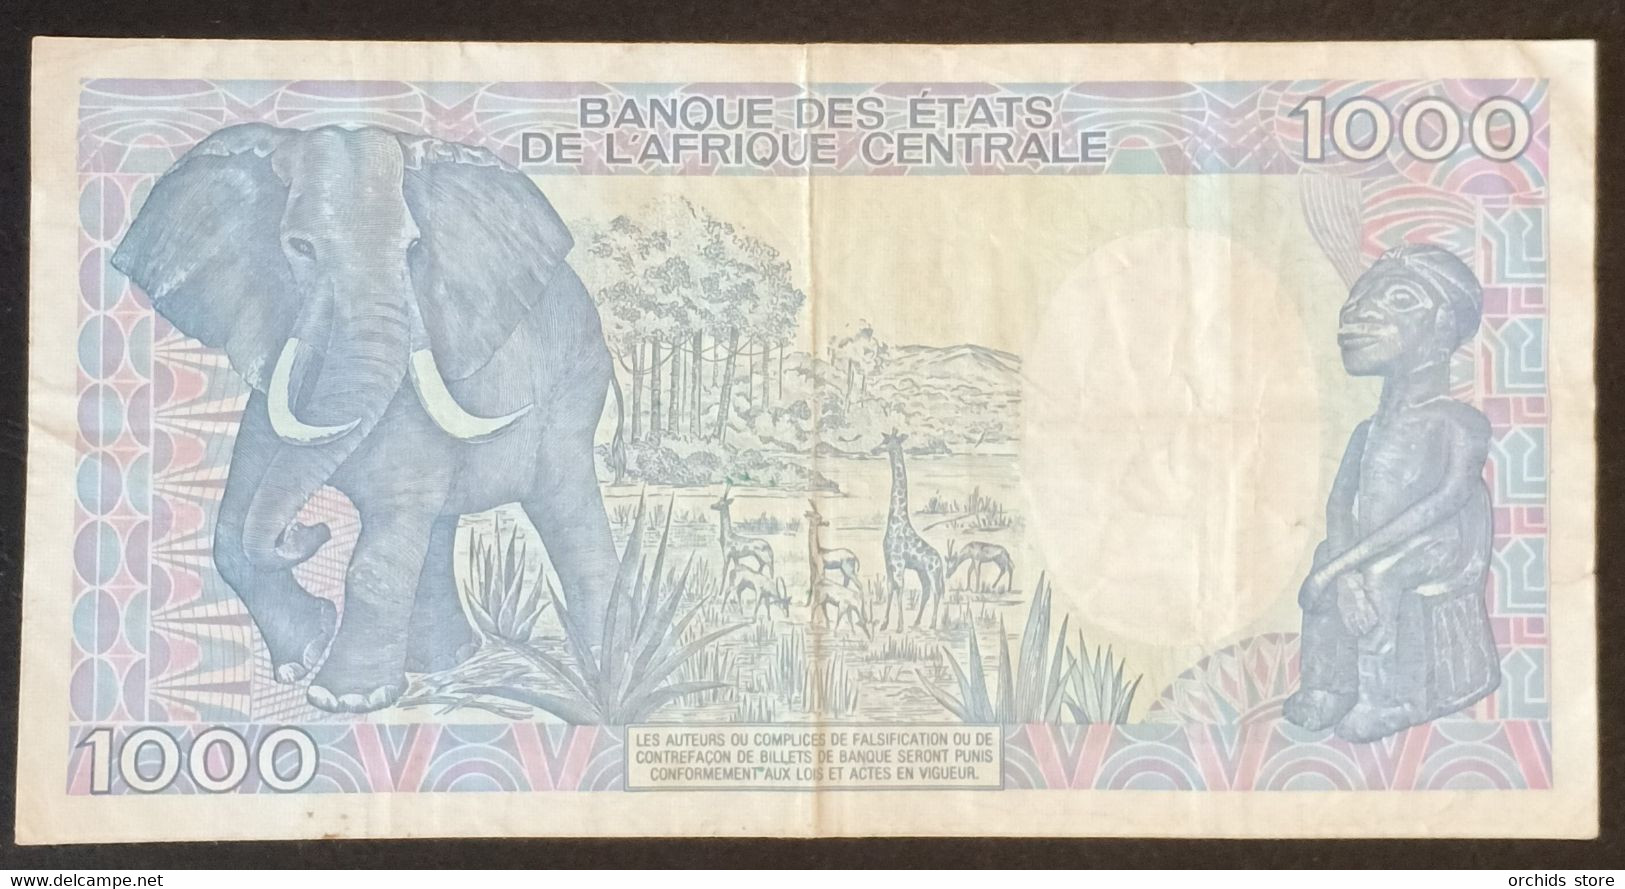 AC2020 - Chad 1991 Banknote 1000 Francs KEY DATE Rare Find - Chad